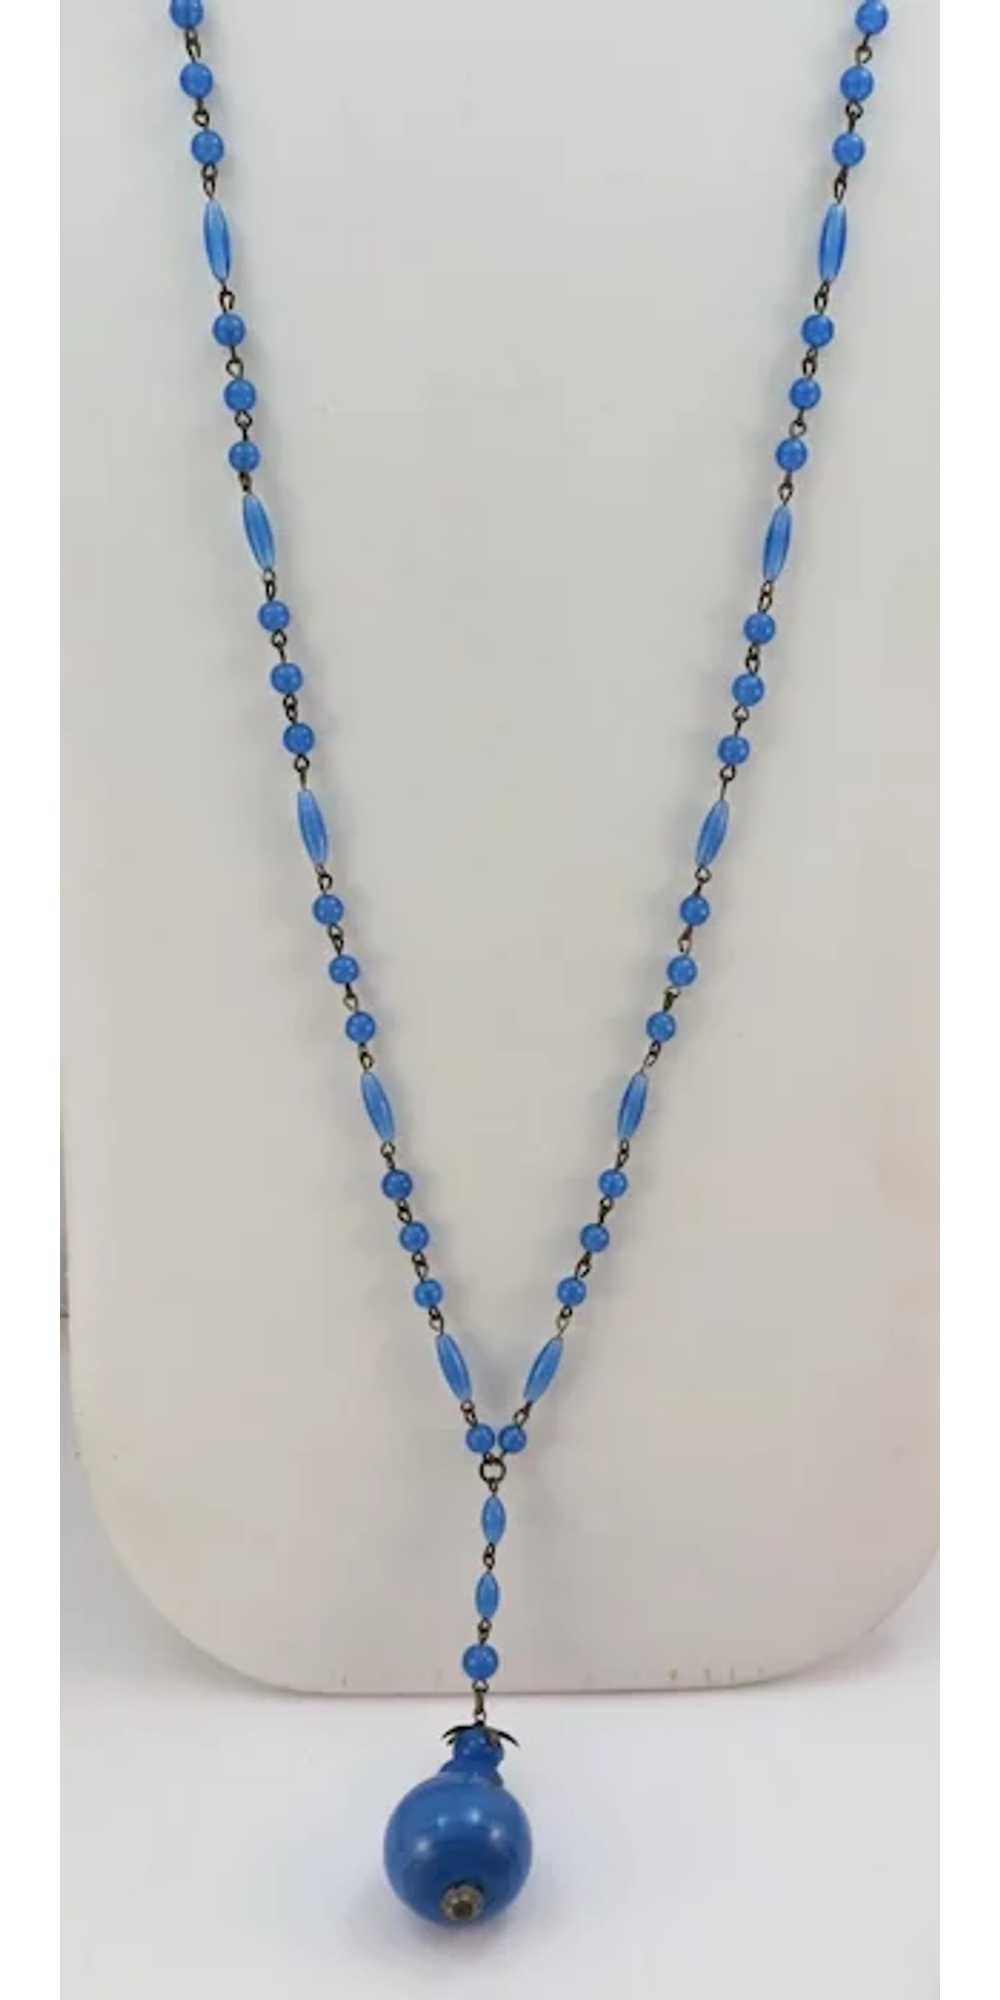 VINTAGE Blue Glass Bead Necklace with Glass MO_JO - image 6